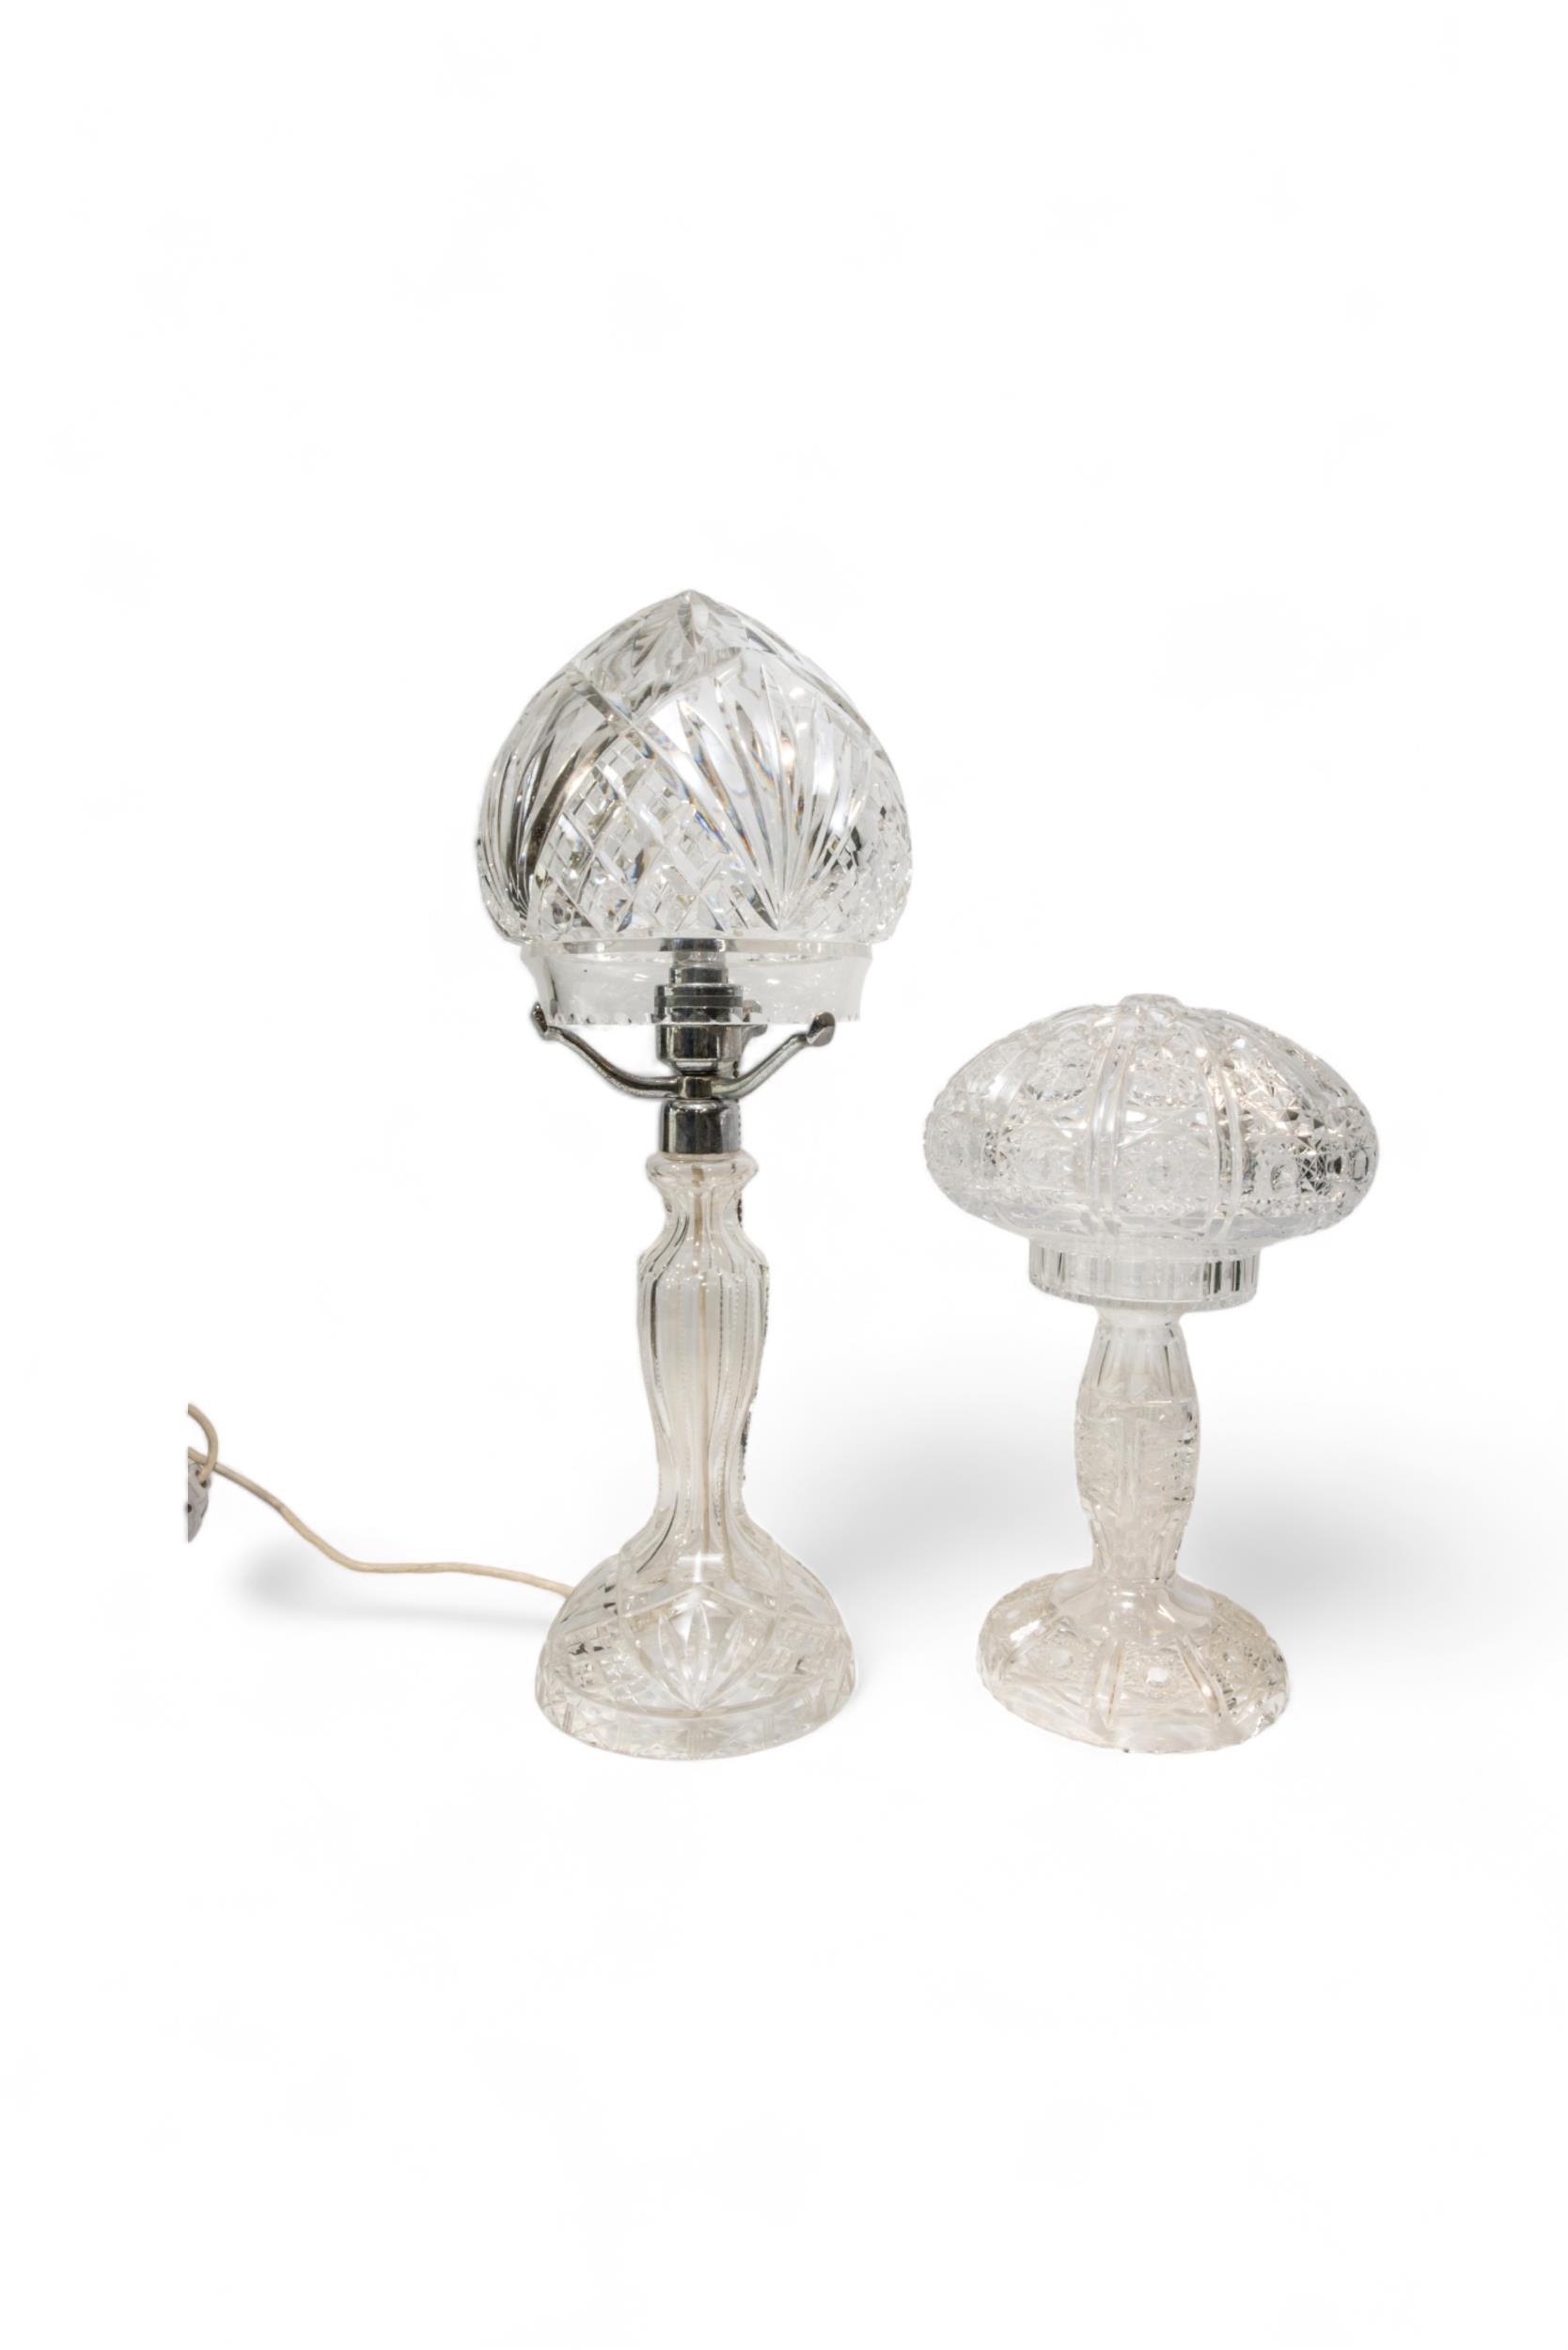 A CUT GLASS TABLE LAMP OF MUSHROOM FORM the shade seated on a chromium mount and another cut glass